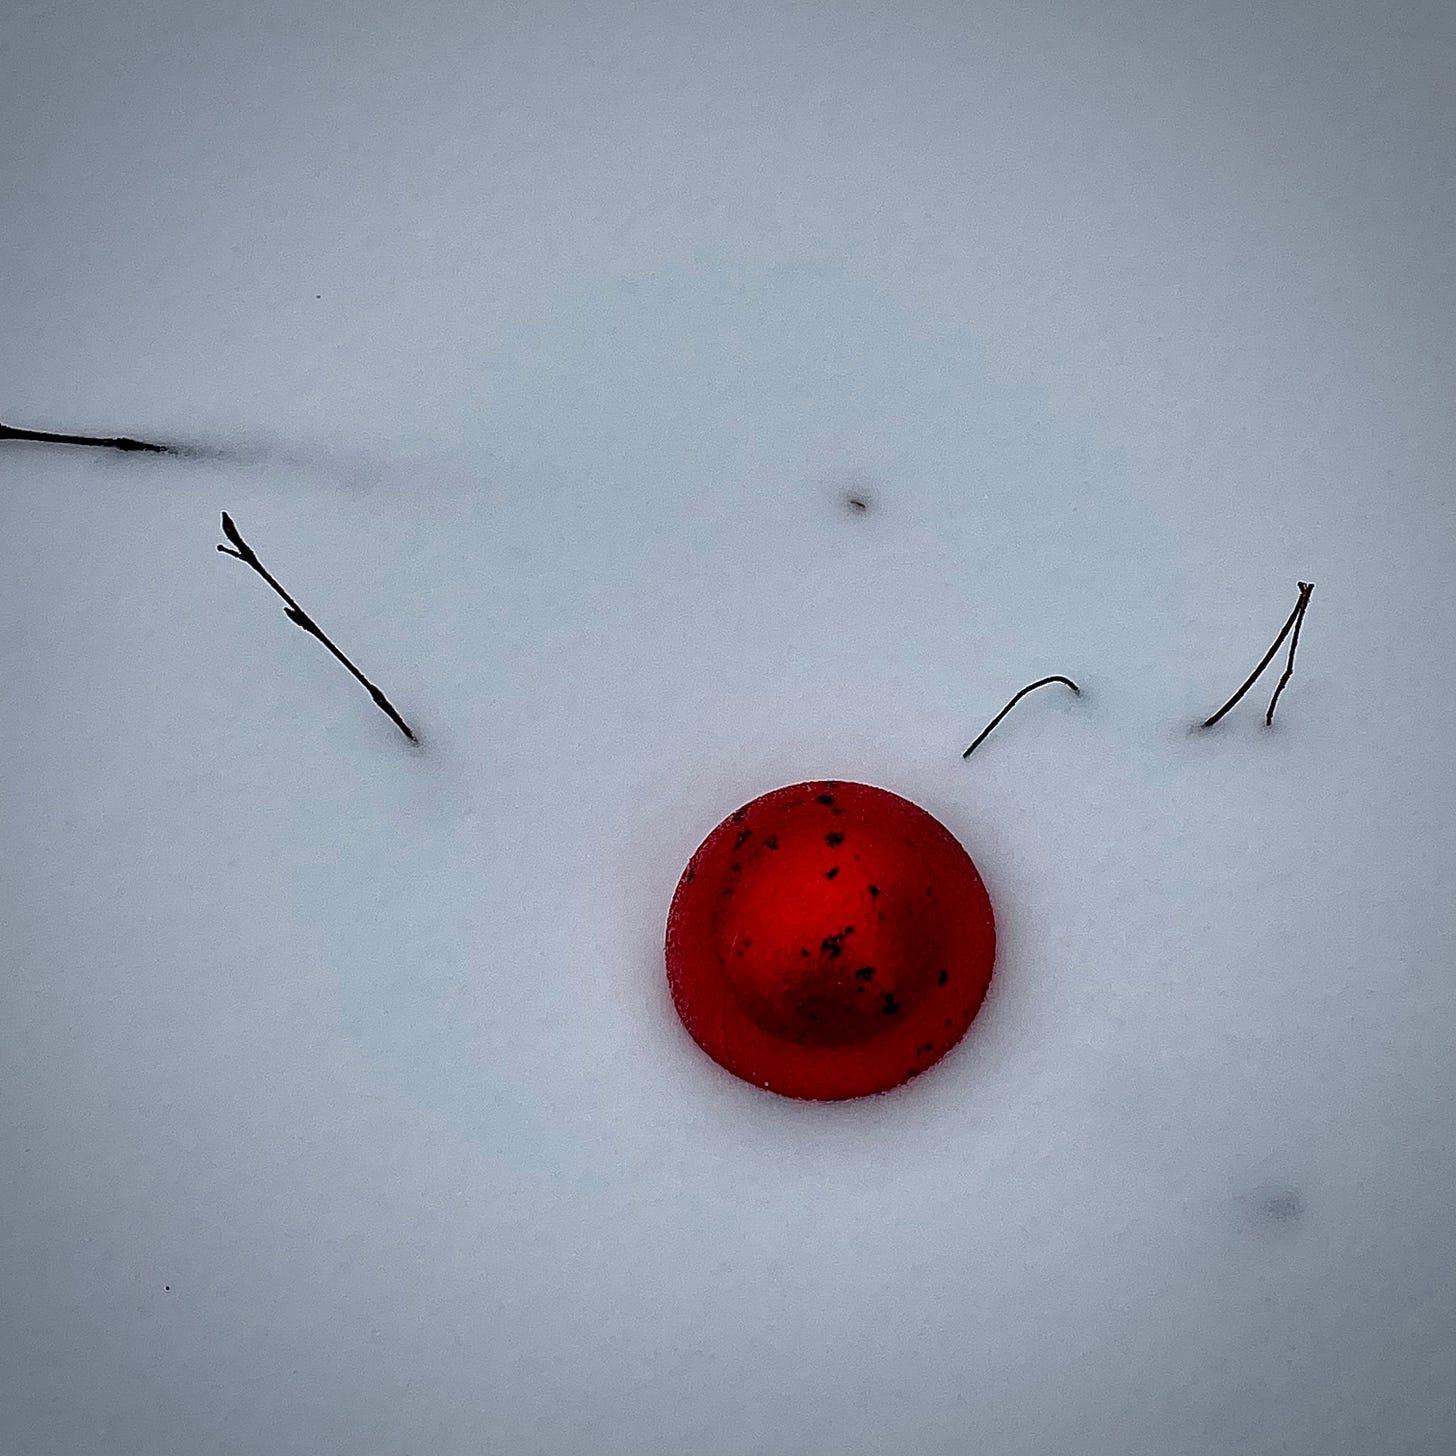 A shiny red ball ornament, half buried in the snow.